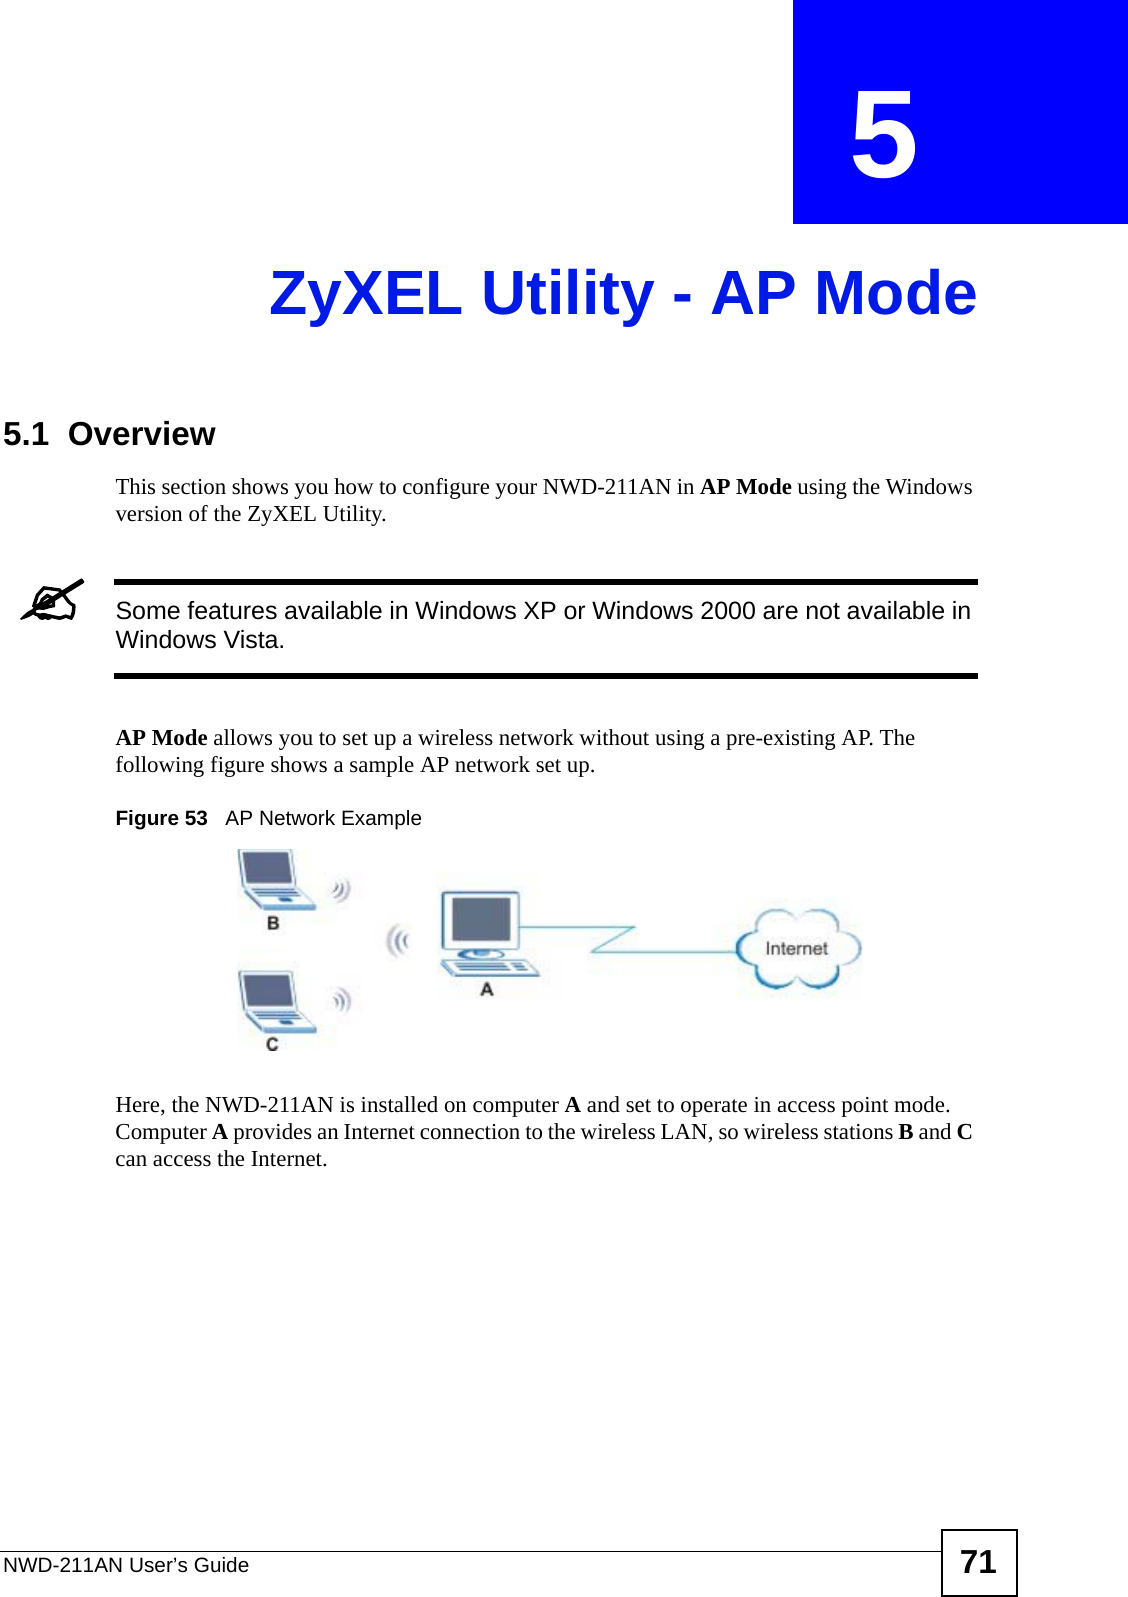 NWD-211AN User’s Guide 71CHAPTER  5 ZyXEL Utility - AP Mode5.1  OverviewThis section shows you how to configure your NWD-211AN in AP Mode using the Windows version of the ZyXEL Utility.&quot;Some features available in Windows XP or Windows 2000 are not available in Windows Vista.AP Mode allows you to set up a wireless network without using a pre-existing AP. The following figure shows a sample AP network set up.Figure 53   AP Network ExampleHere, the NWD-211AN is installed on computer A and set to operate in access point mode. Computer A provides an Internet connection to the wireless LAN, so wireless stations B and C can access the Internet.